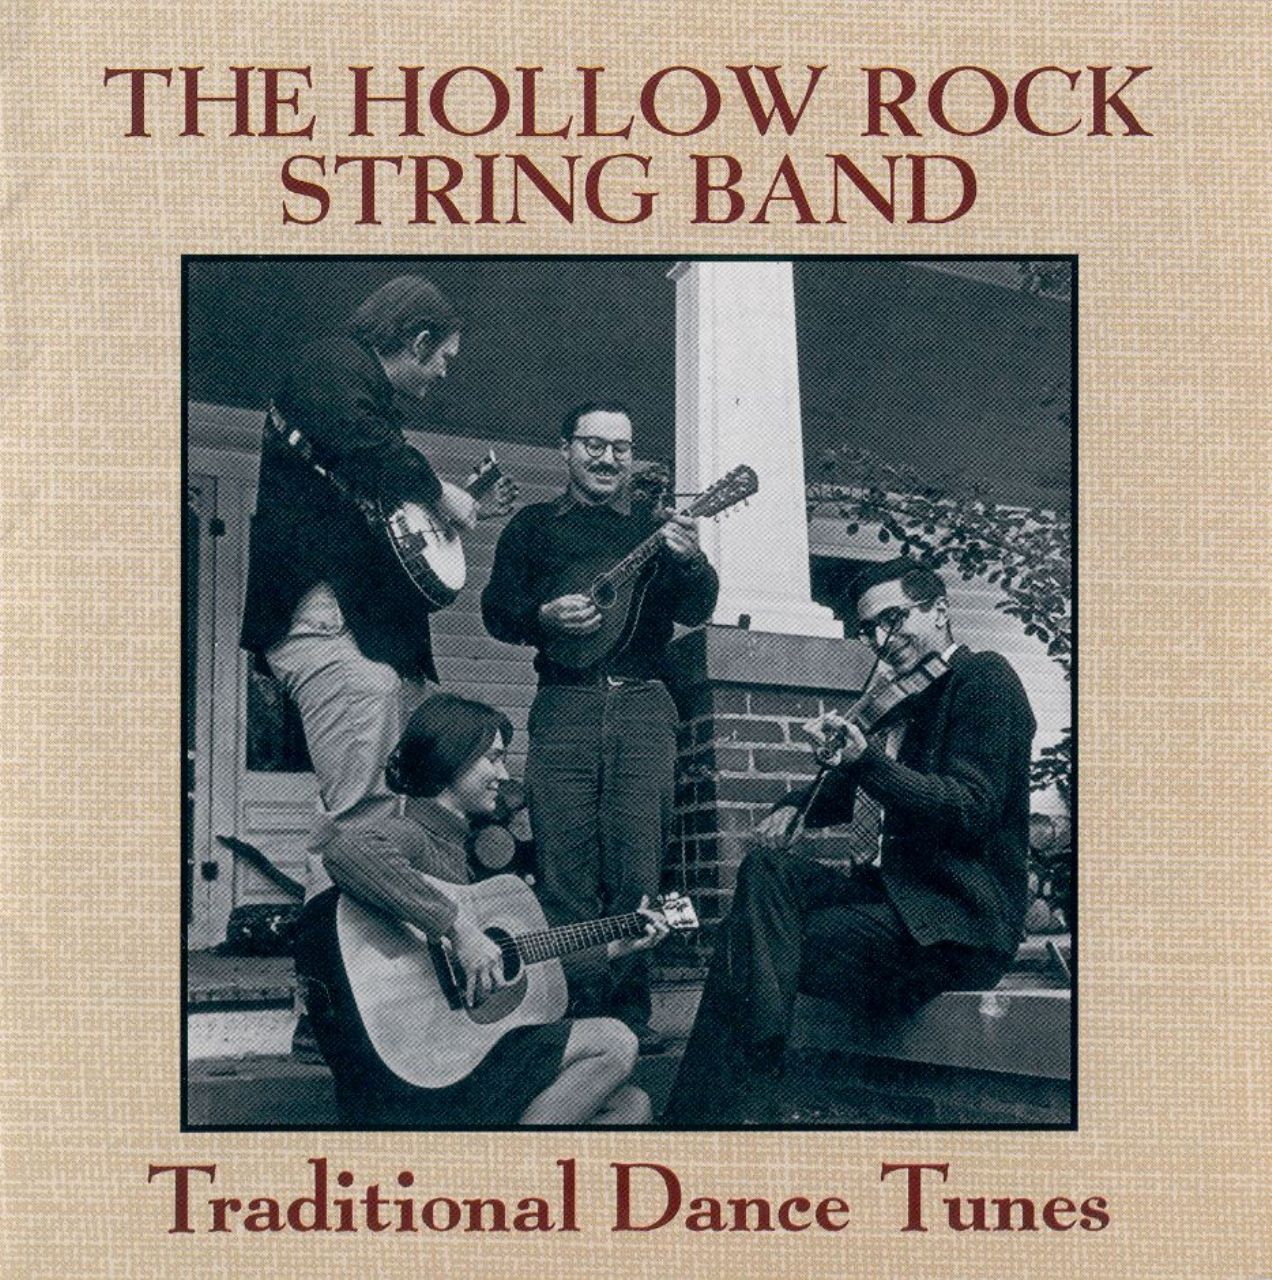 Hollow Rock String Band - Traditional Dance Tunes cover album